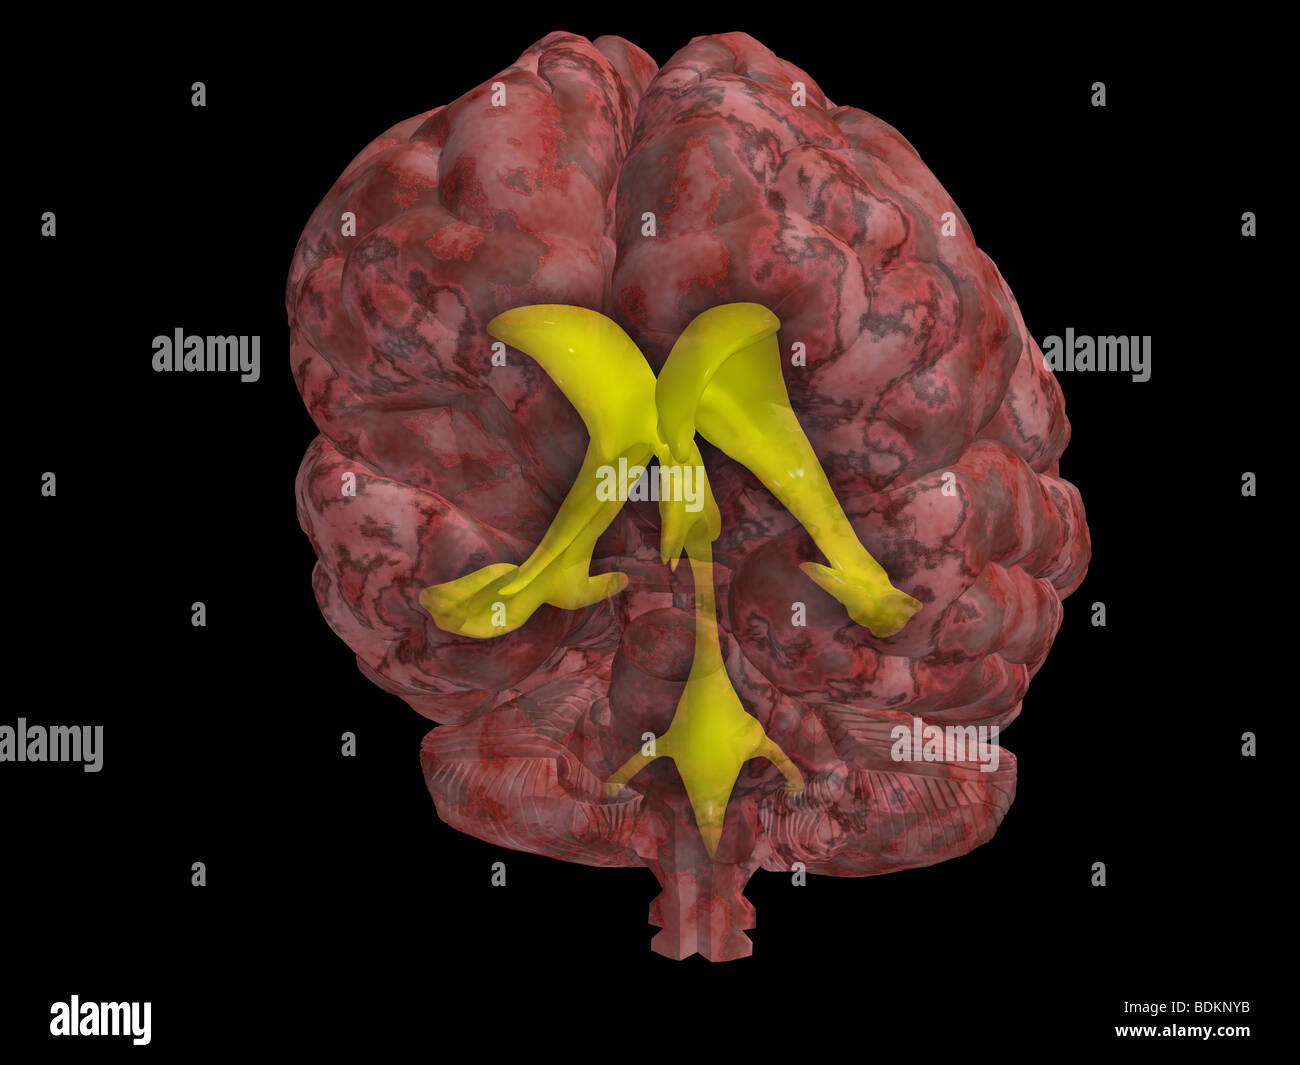 computer graphics model of the human brain showing the location of the cerebral spinal fluid ventricular system within the brain Stock Photo